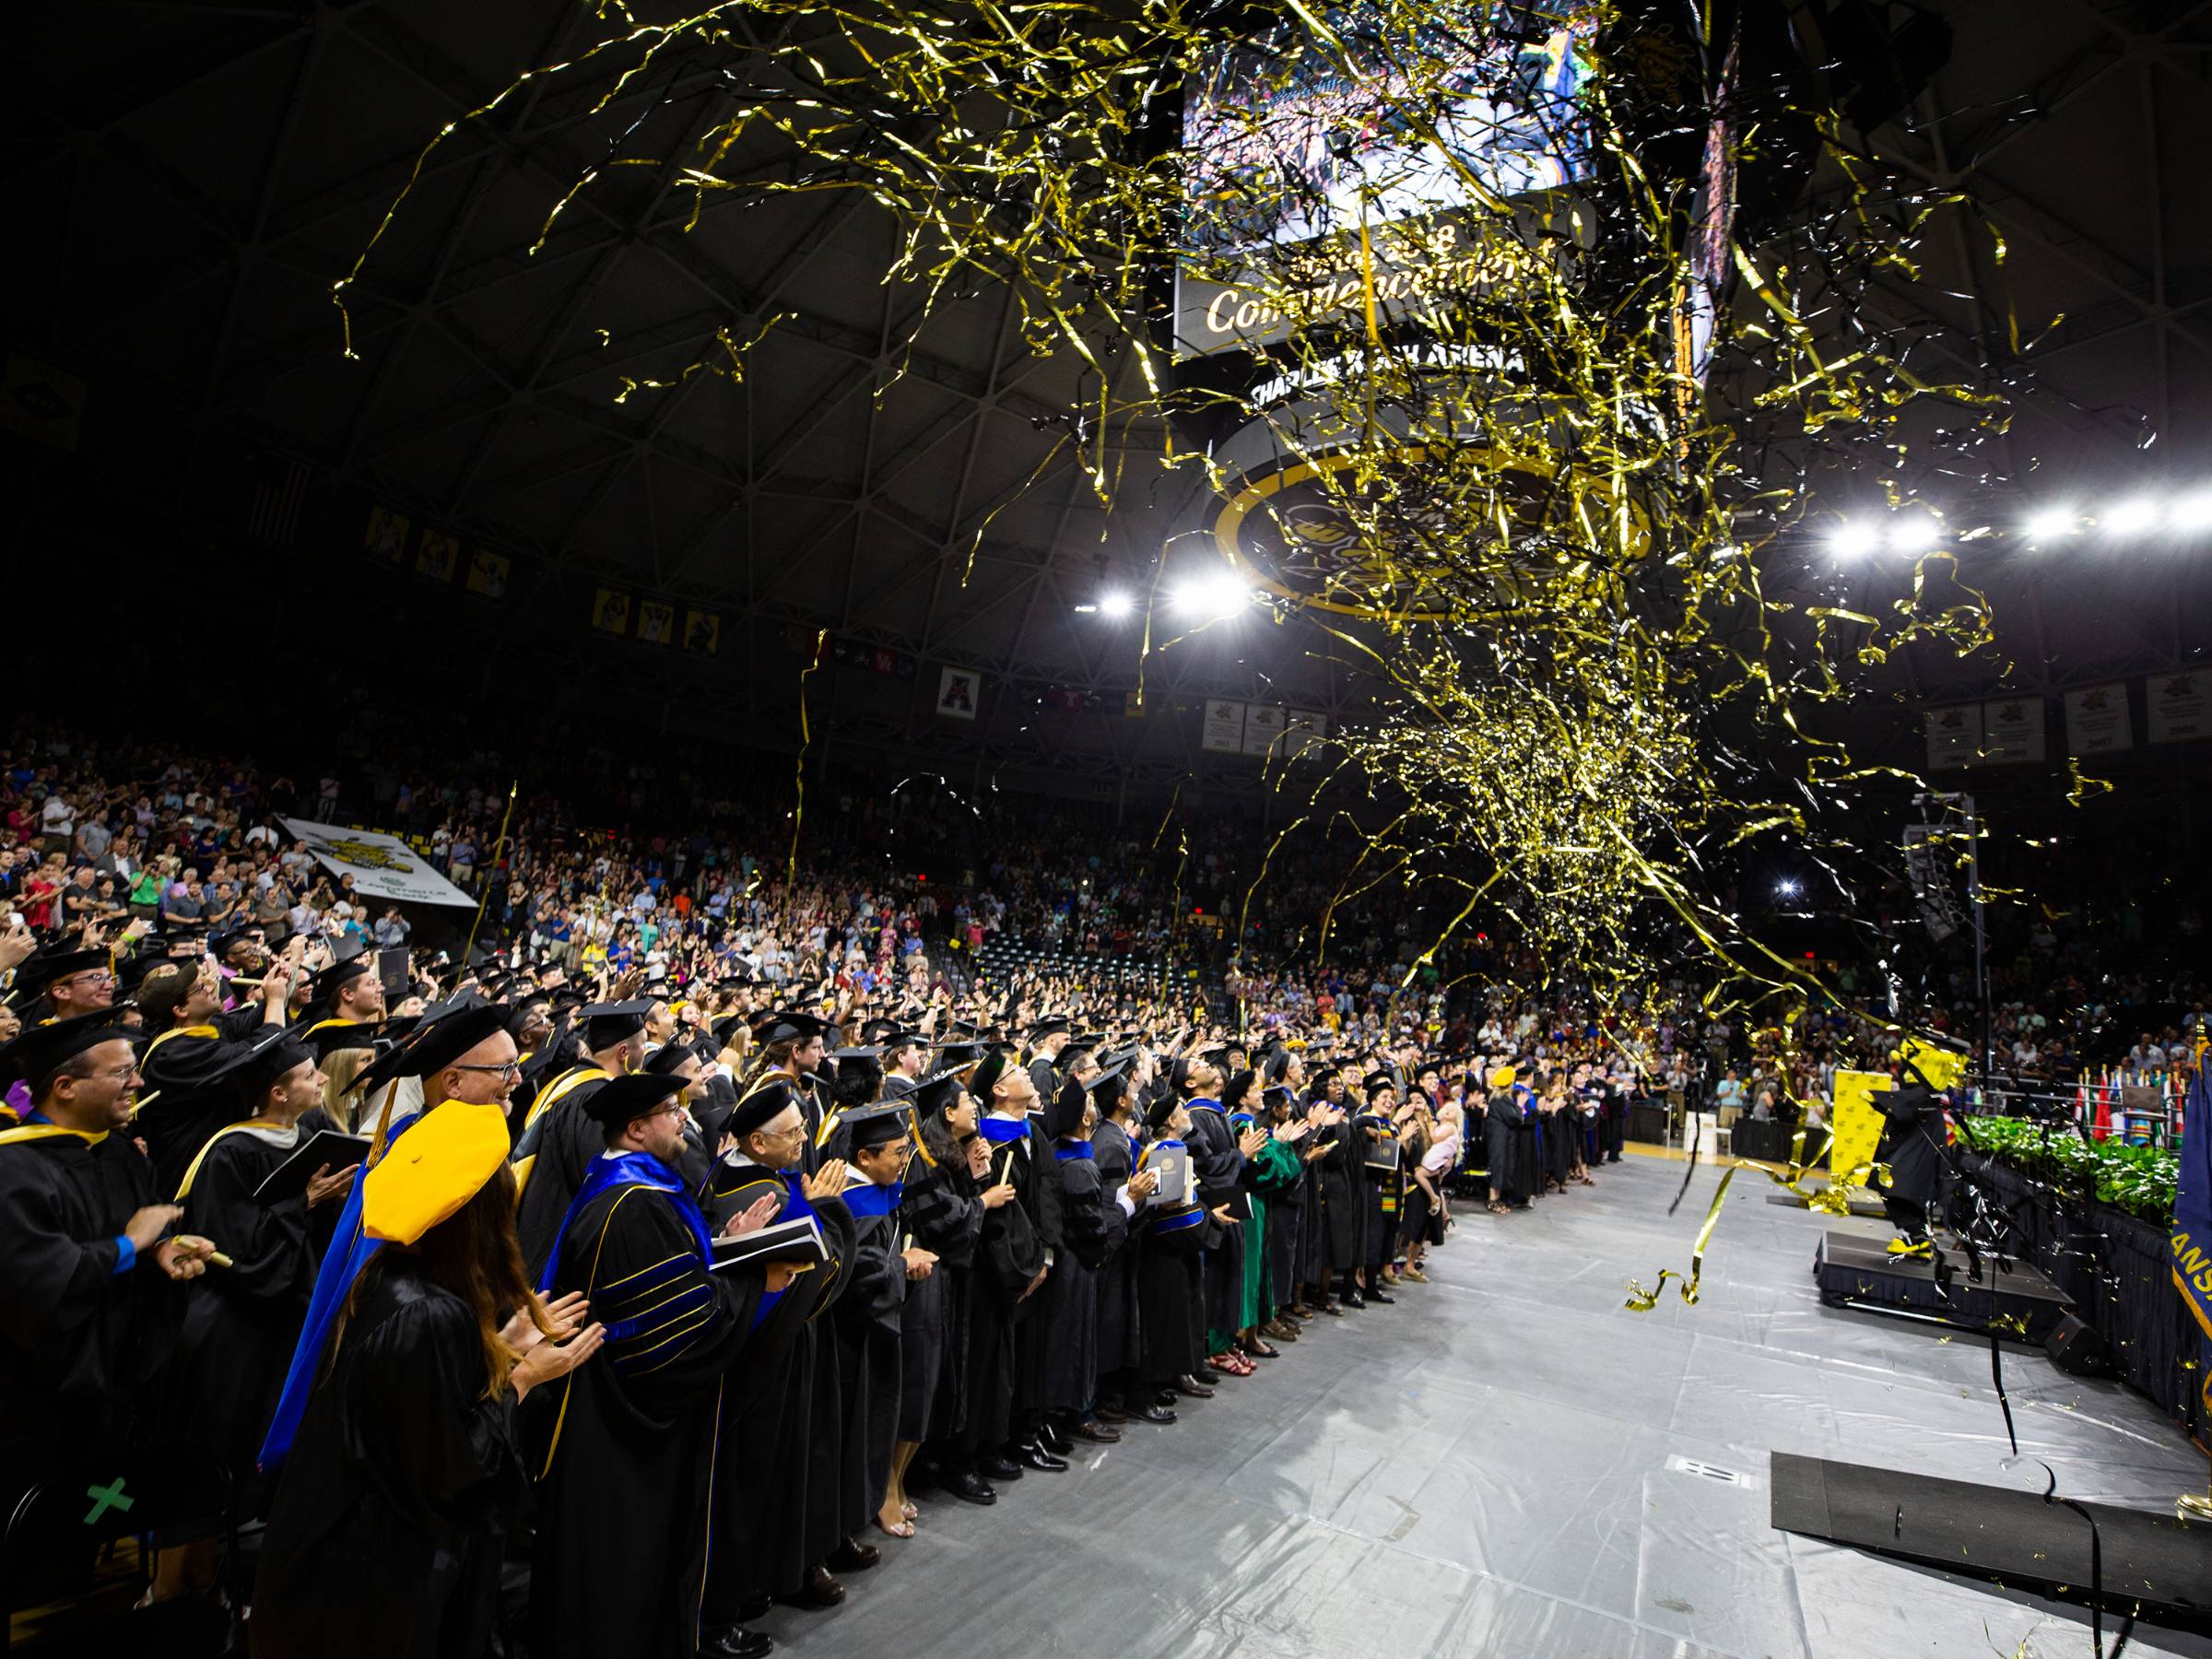 Confetti streamers are released over the crowd to celebrate the completion of Wichita State's annual commencement exercises